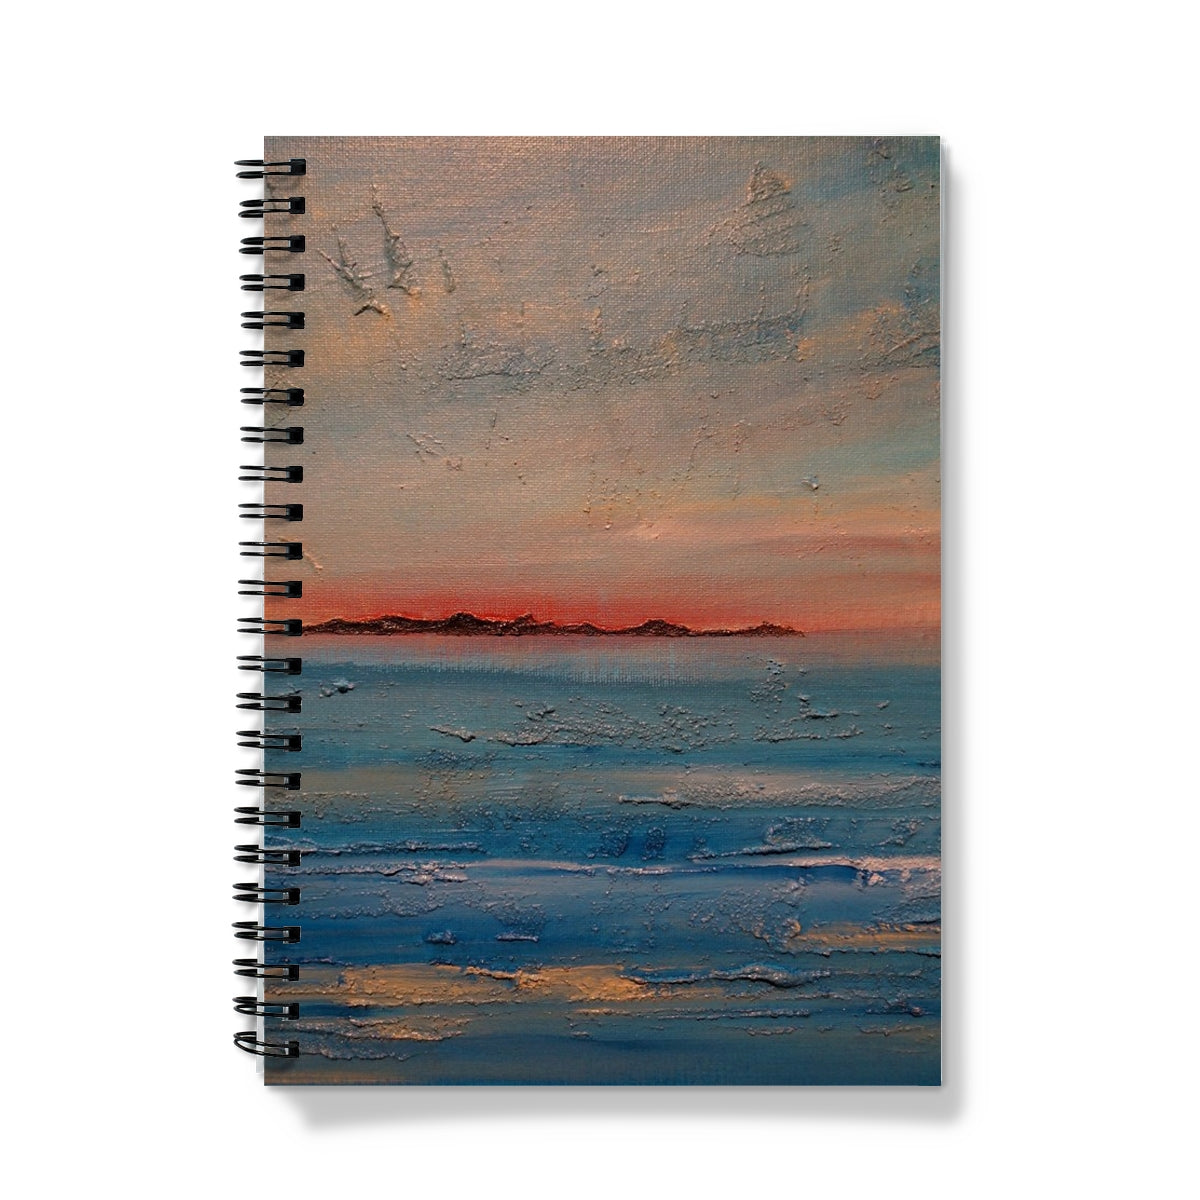 Gigha Sunset Art Gifts Notebook-Journals & Notebooks-Hebridean Islands Art Gallery-A4-Lined-Paintings, Prints, Homeware, Art Gifts From Scotland By Scottish Artist Kevin Hunter